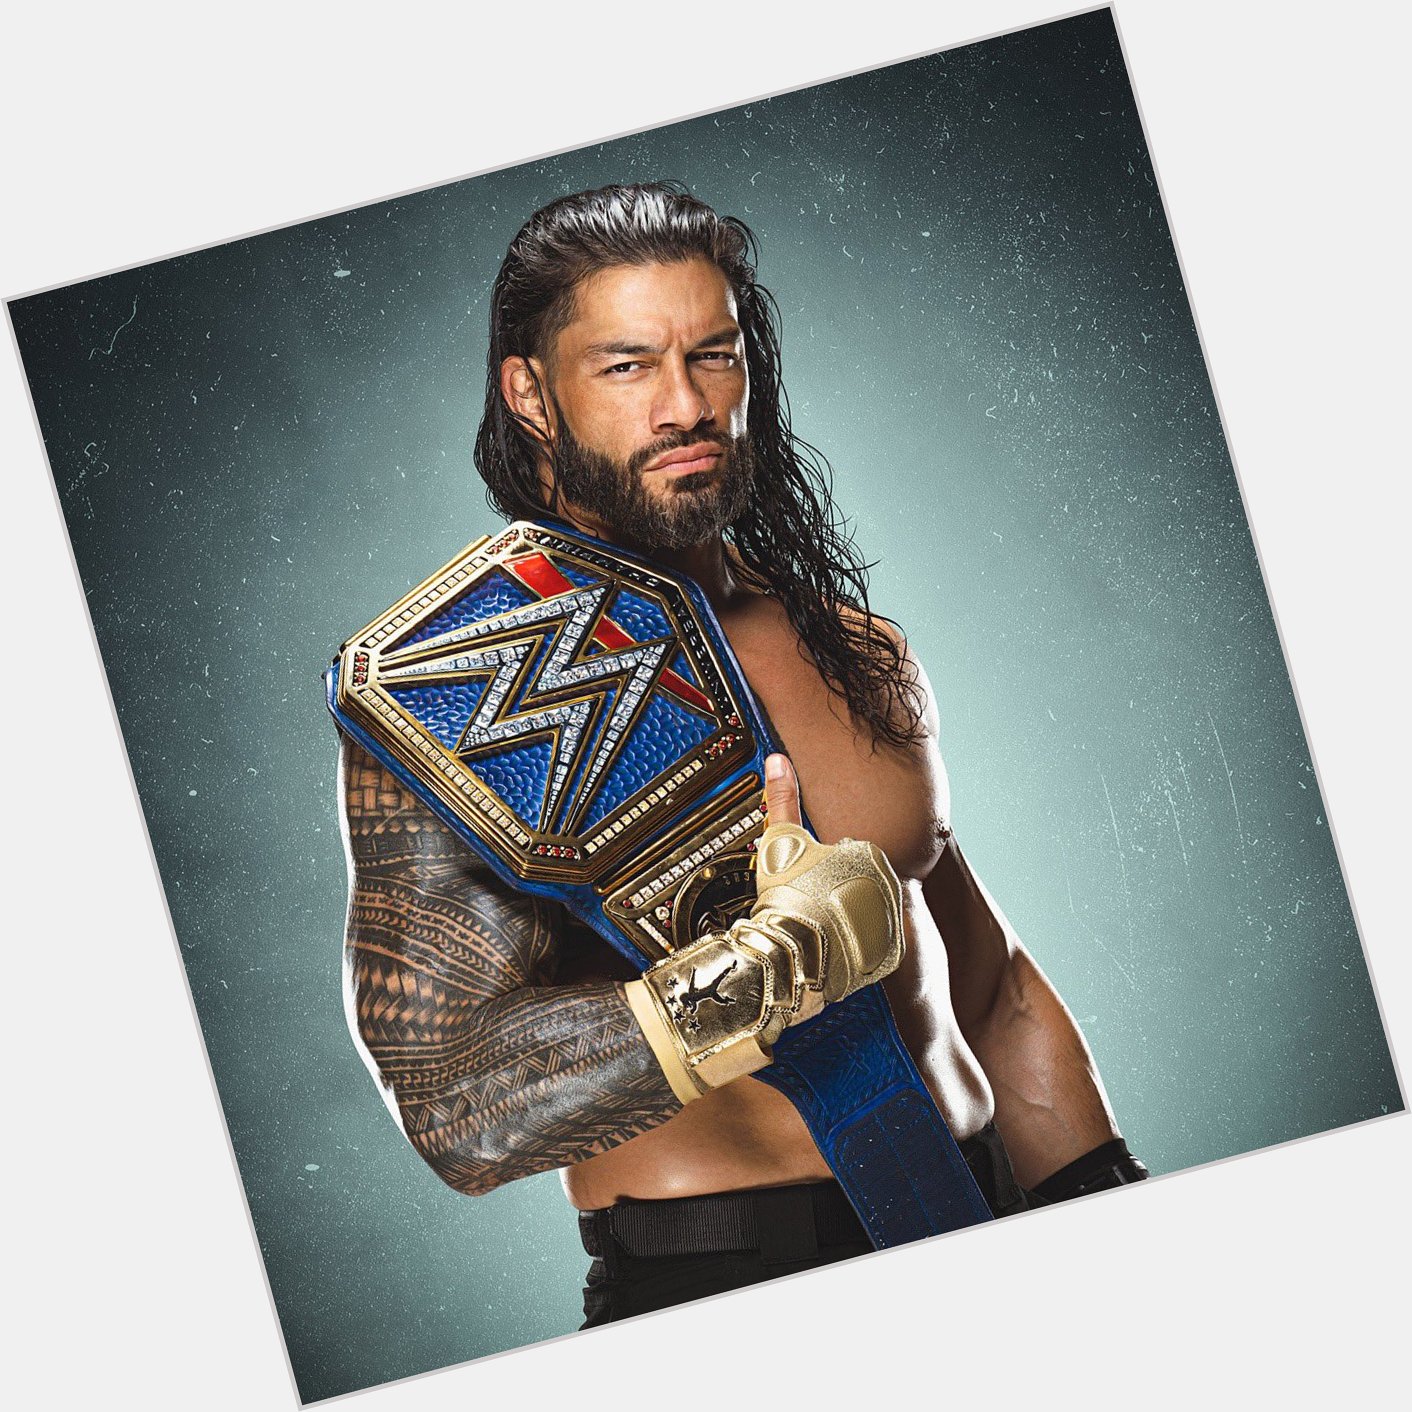 Happy 36th Birthday to WWE Superstar, current Universal Champion and future Hall of Famer Roman Reigns. 